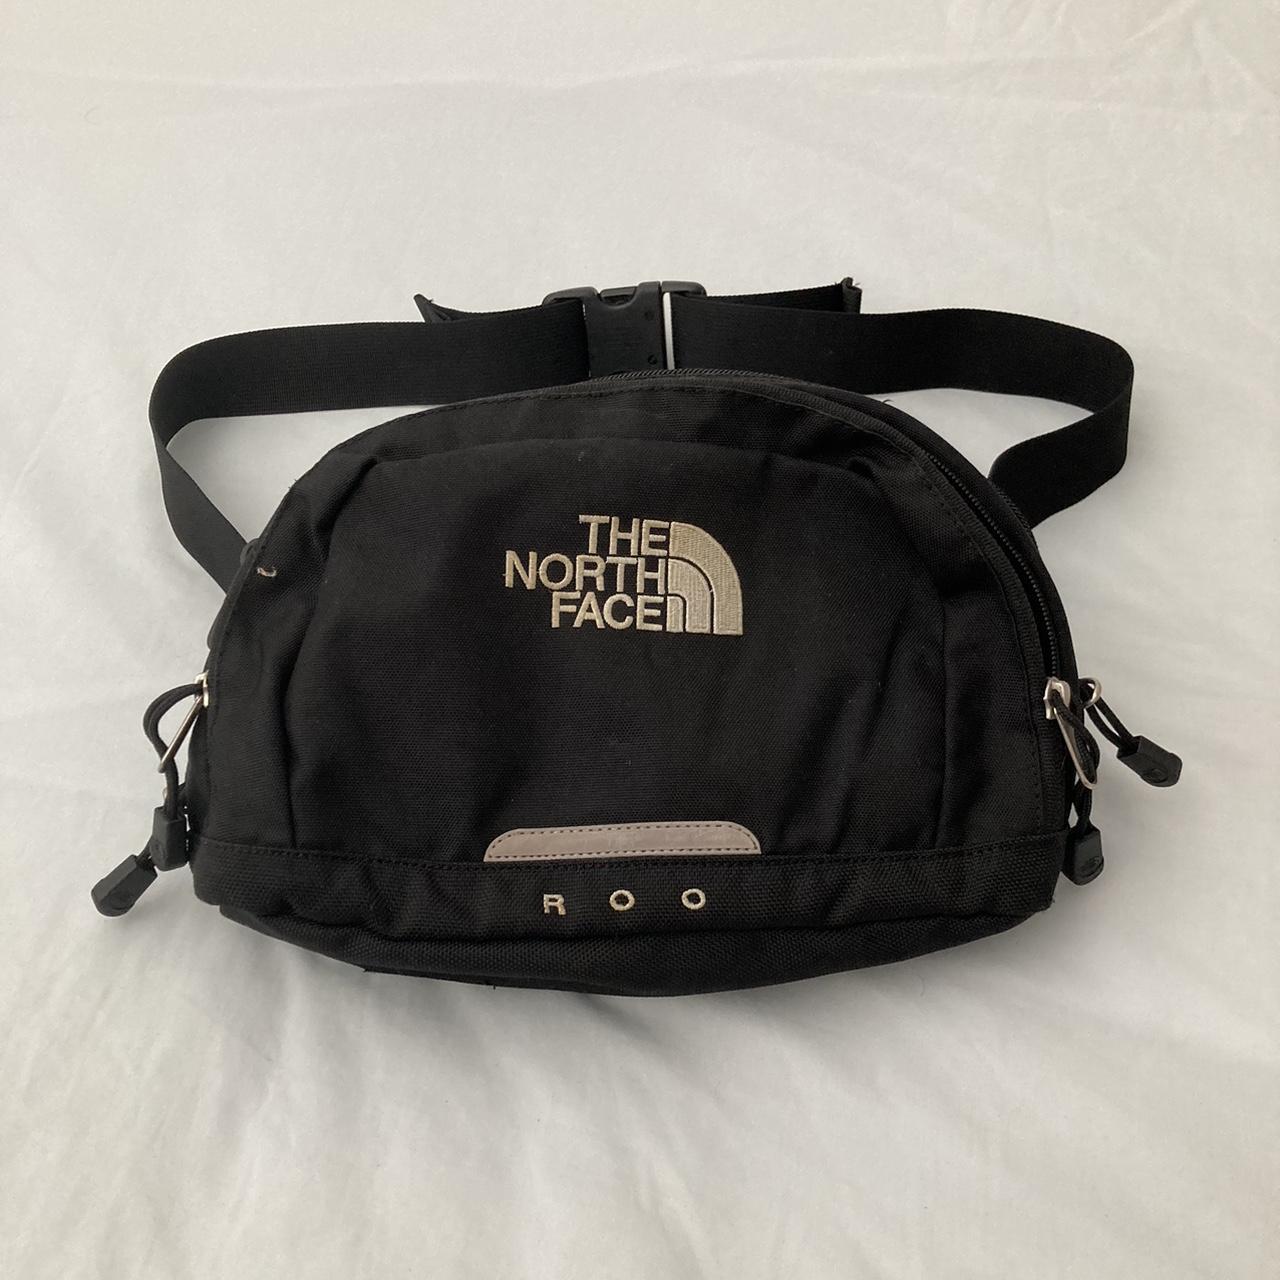 The Northface bag / fanny pack / pouch. Has been... - Depop